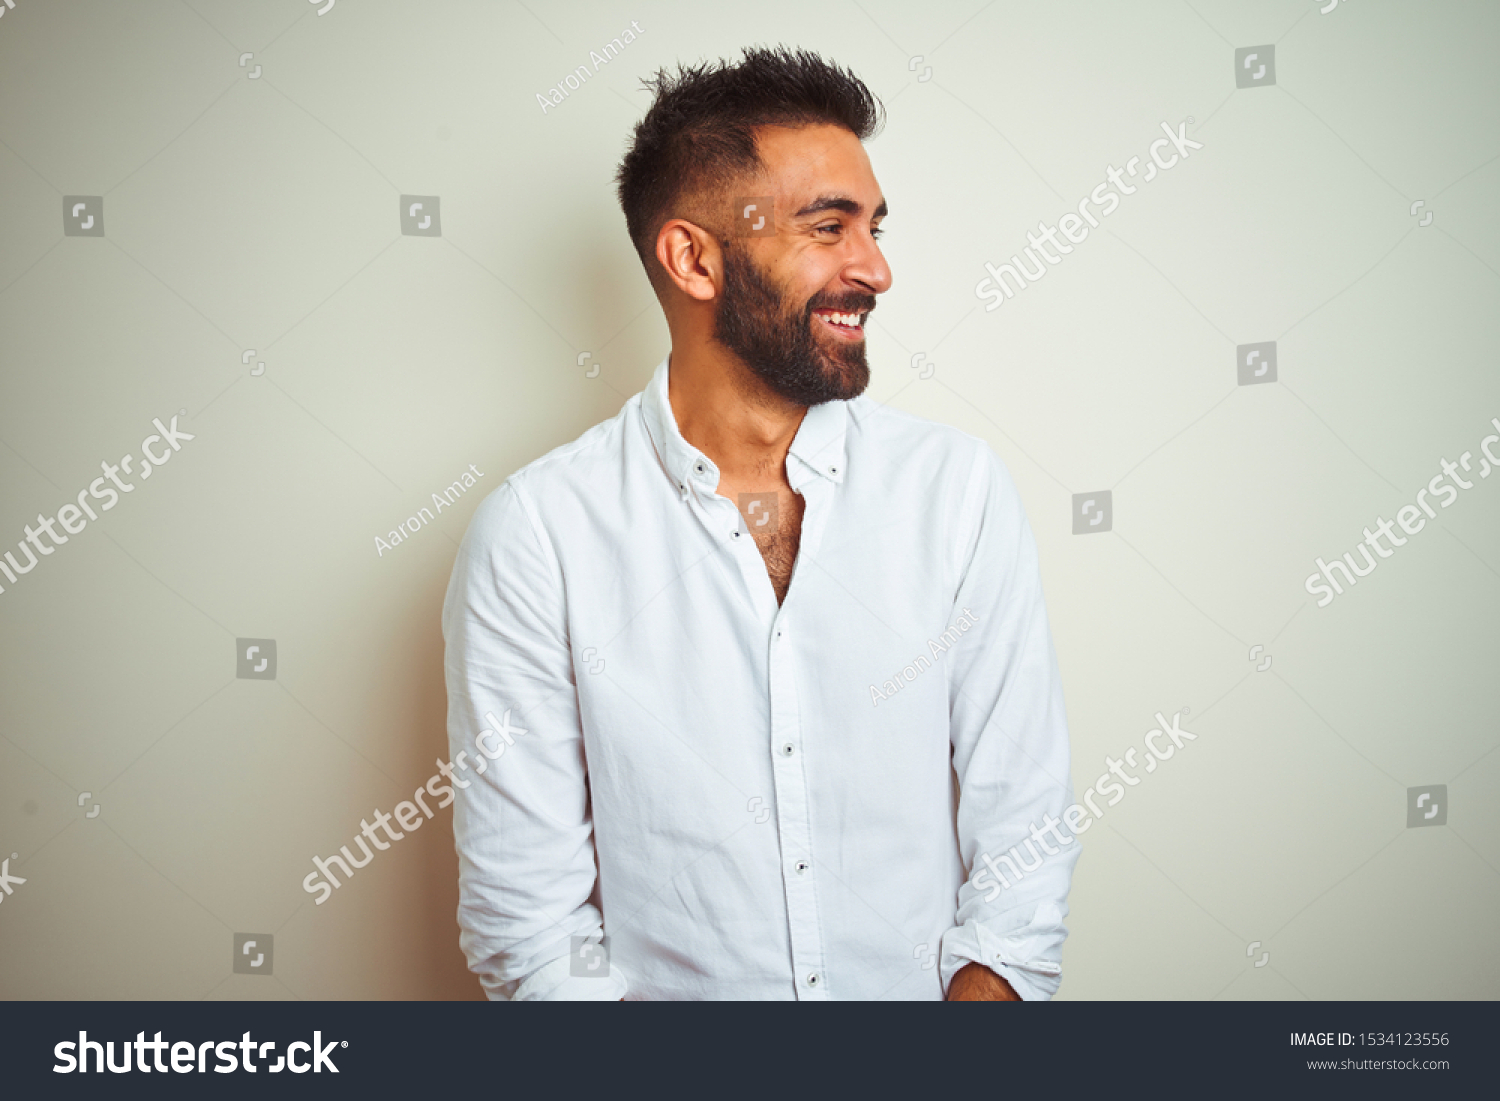 Young indian man wearing elegant shirt standing over isolated white background looking away to side with smile on face, natural expression. Laughing confident. #1534123556